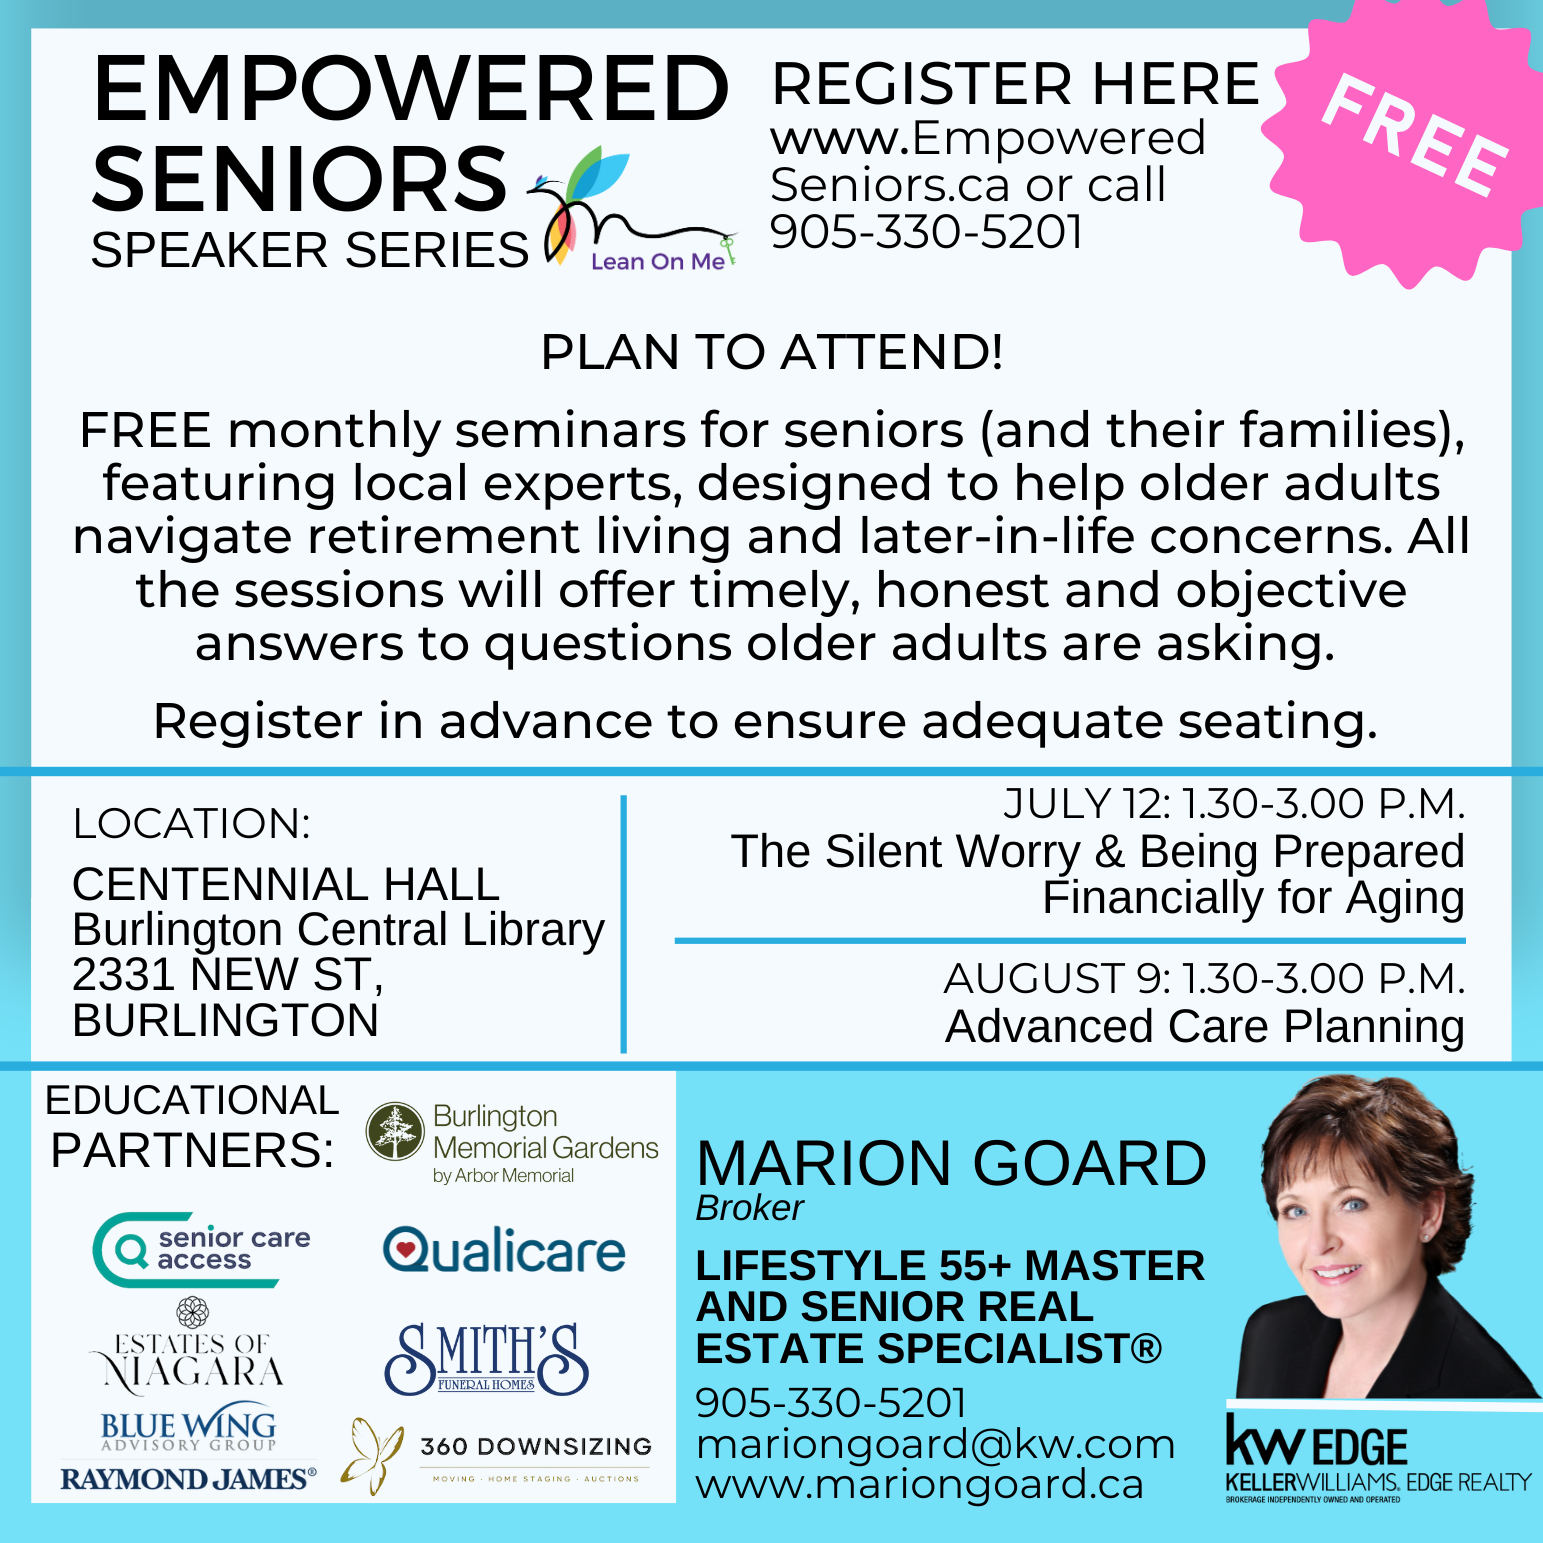 Empowered Seniors Speaker Series with Marion Goard and SeniorCareAccess.com